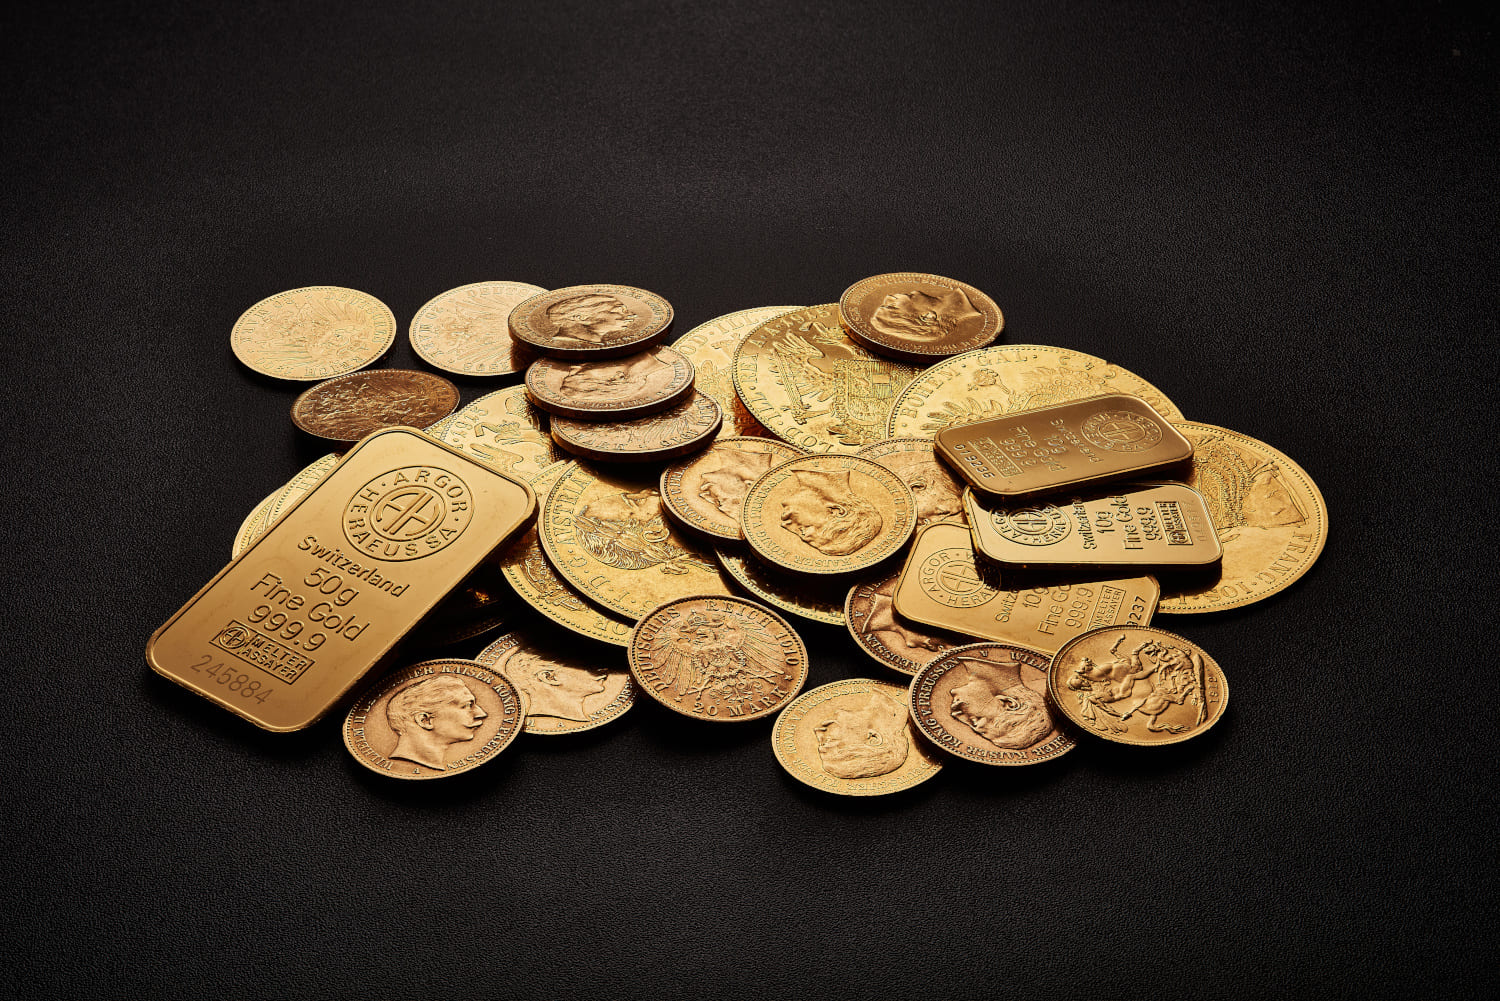 Gold bars and gold coins against a black background